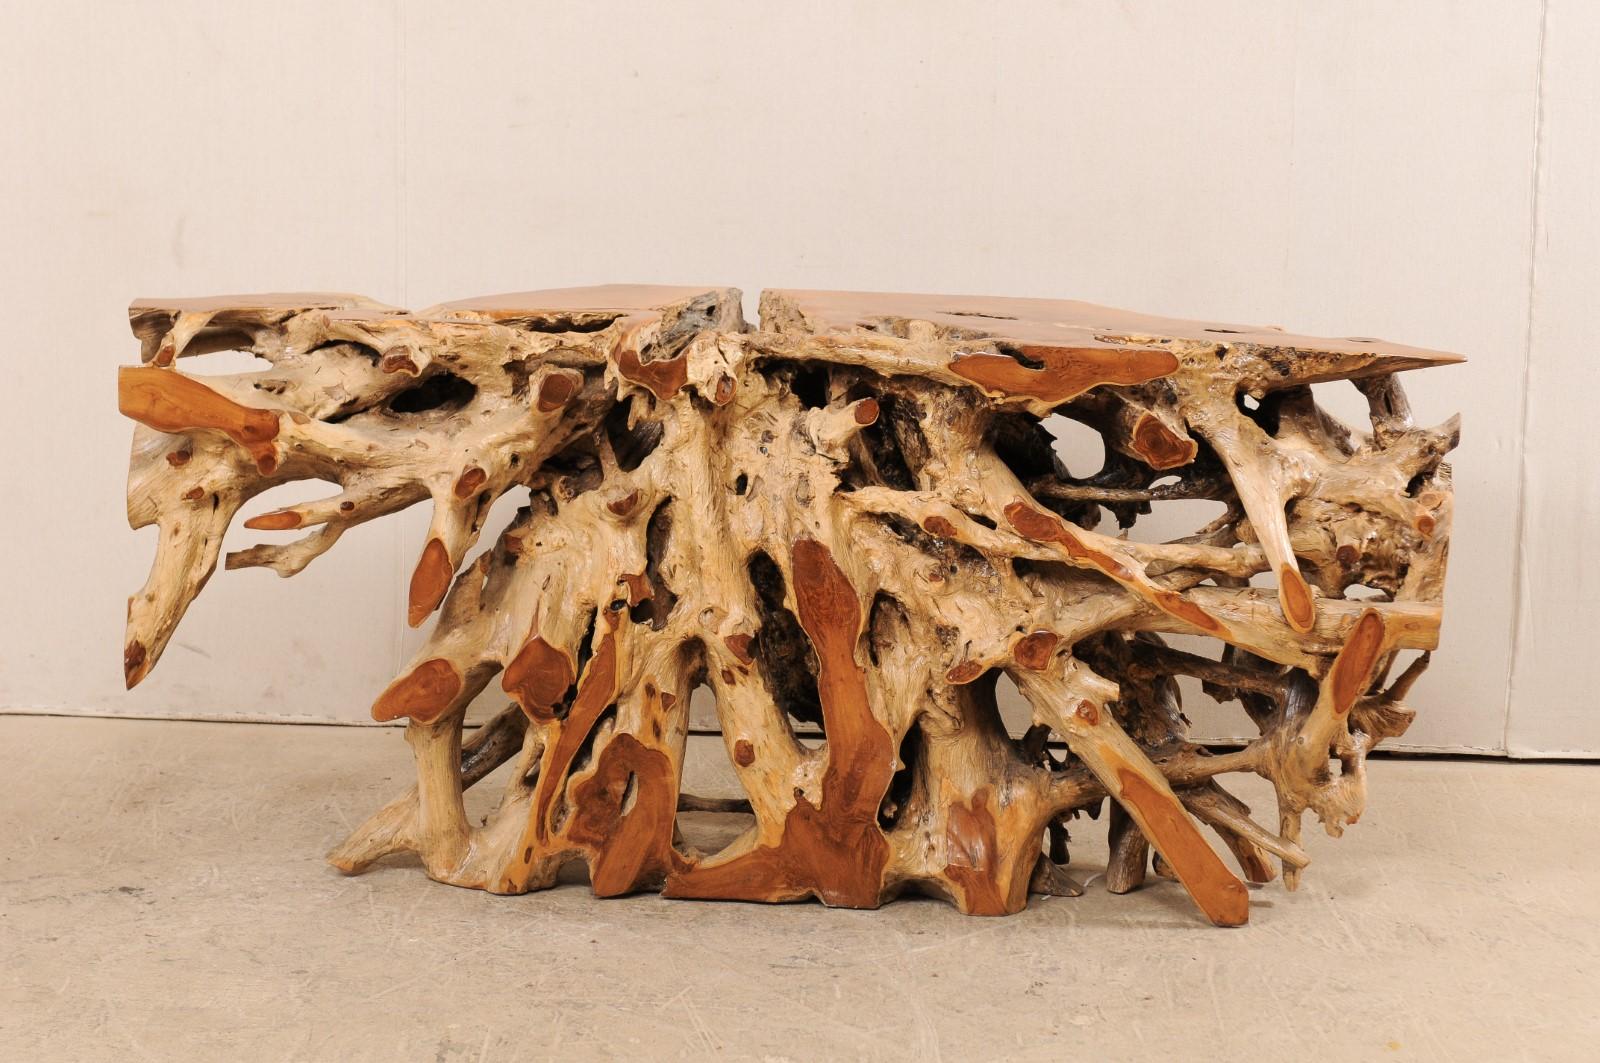 A particularly beautiful teak tree root console table. This wooden console table has been custom fashioned from a large cut section of old teak whose intertwining roots give it an organic and airy feel. There is a nice contrast of colors and